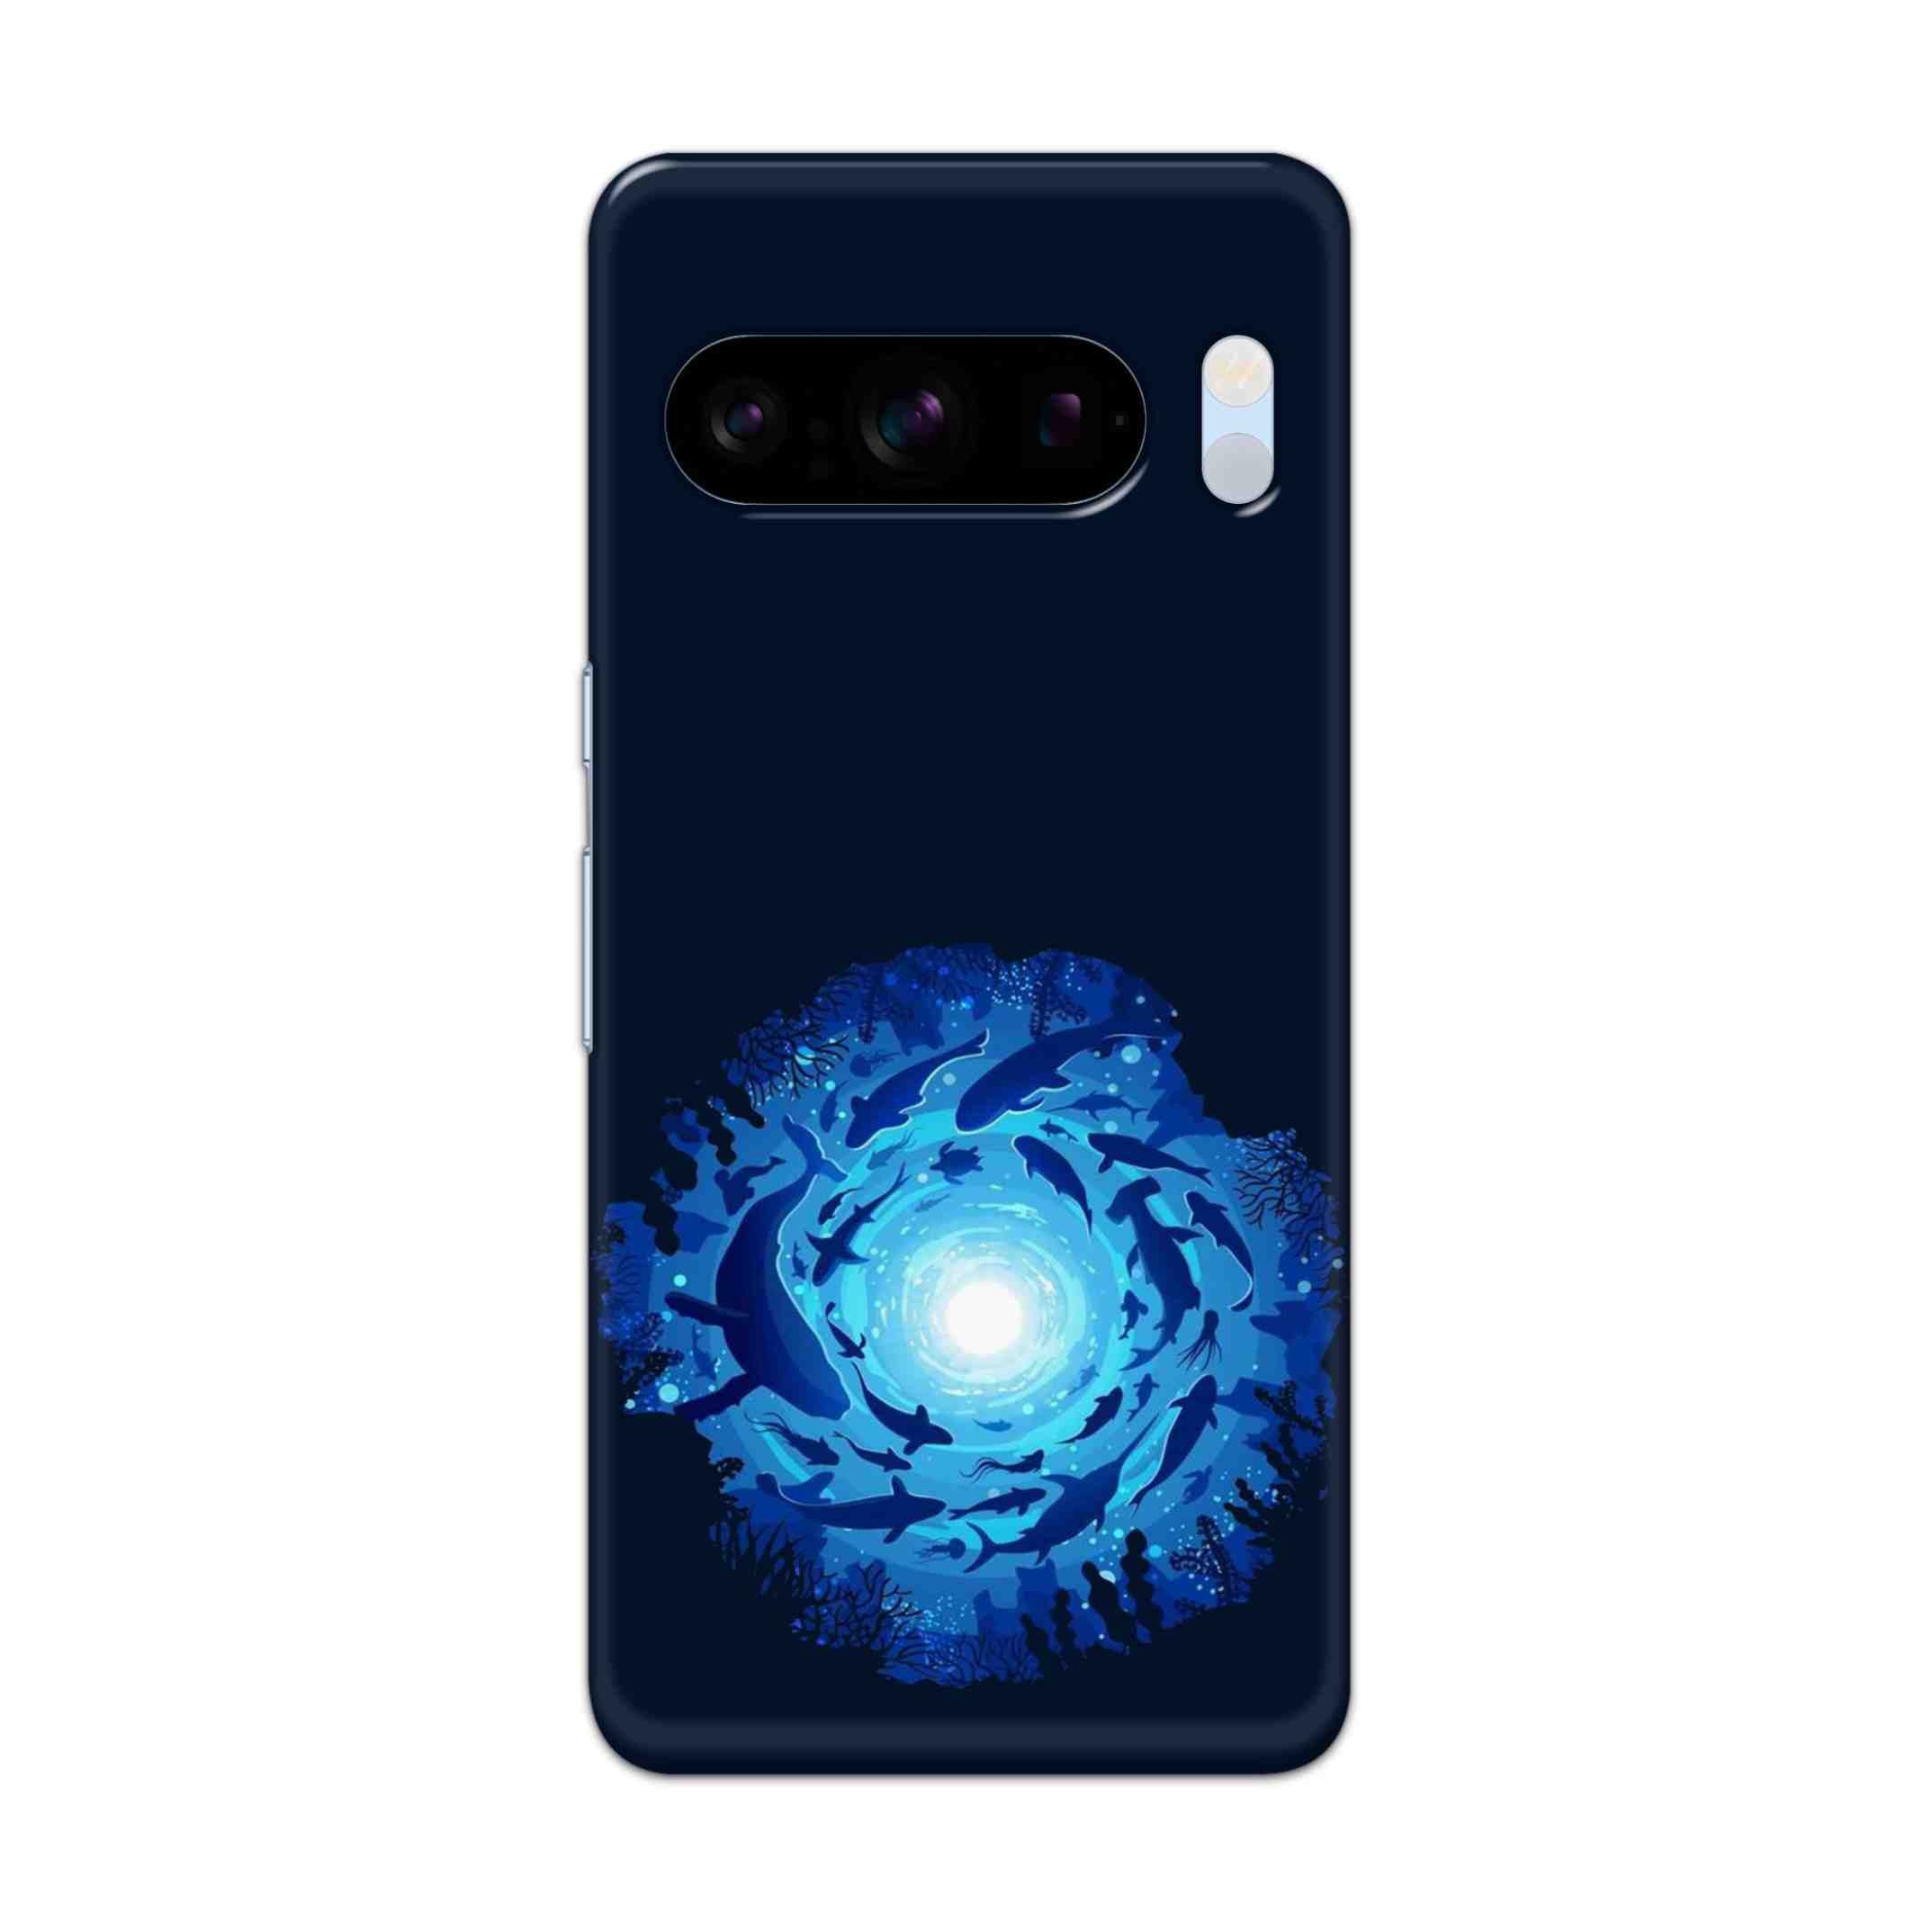 Buy Blue Whale Hard Back Mobile Phone Case/Cover For Pixel 8 Pro Online